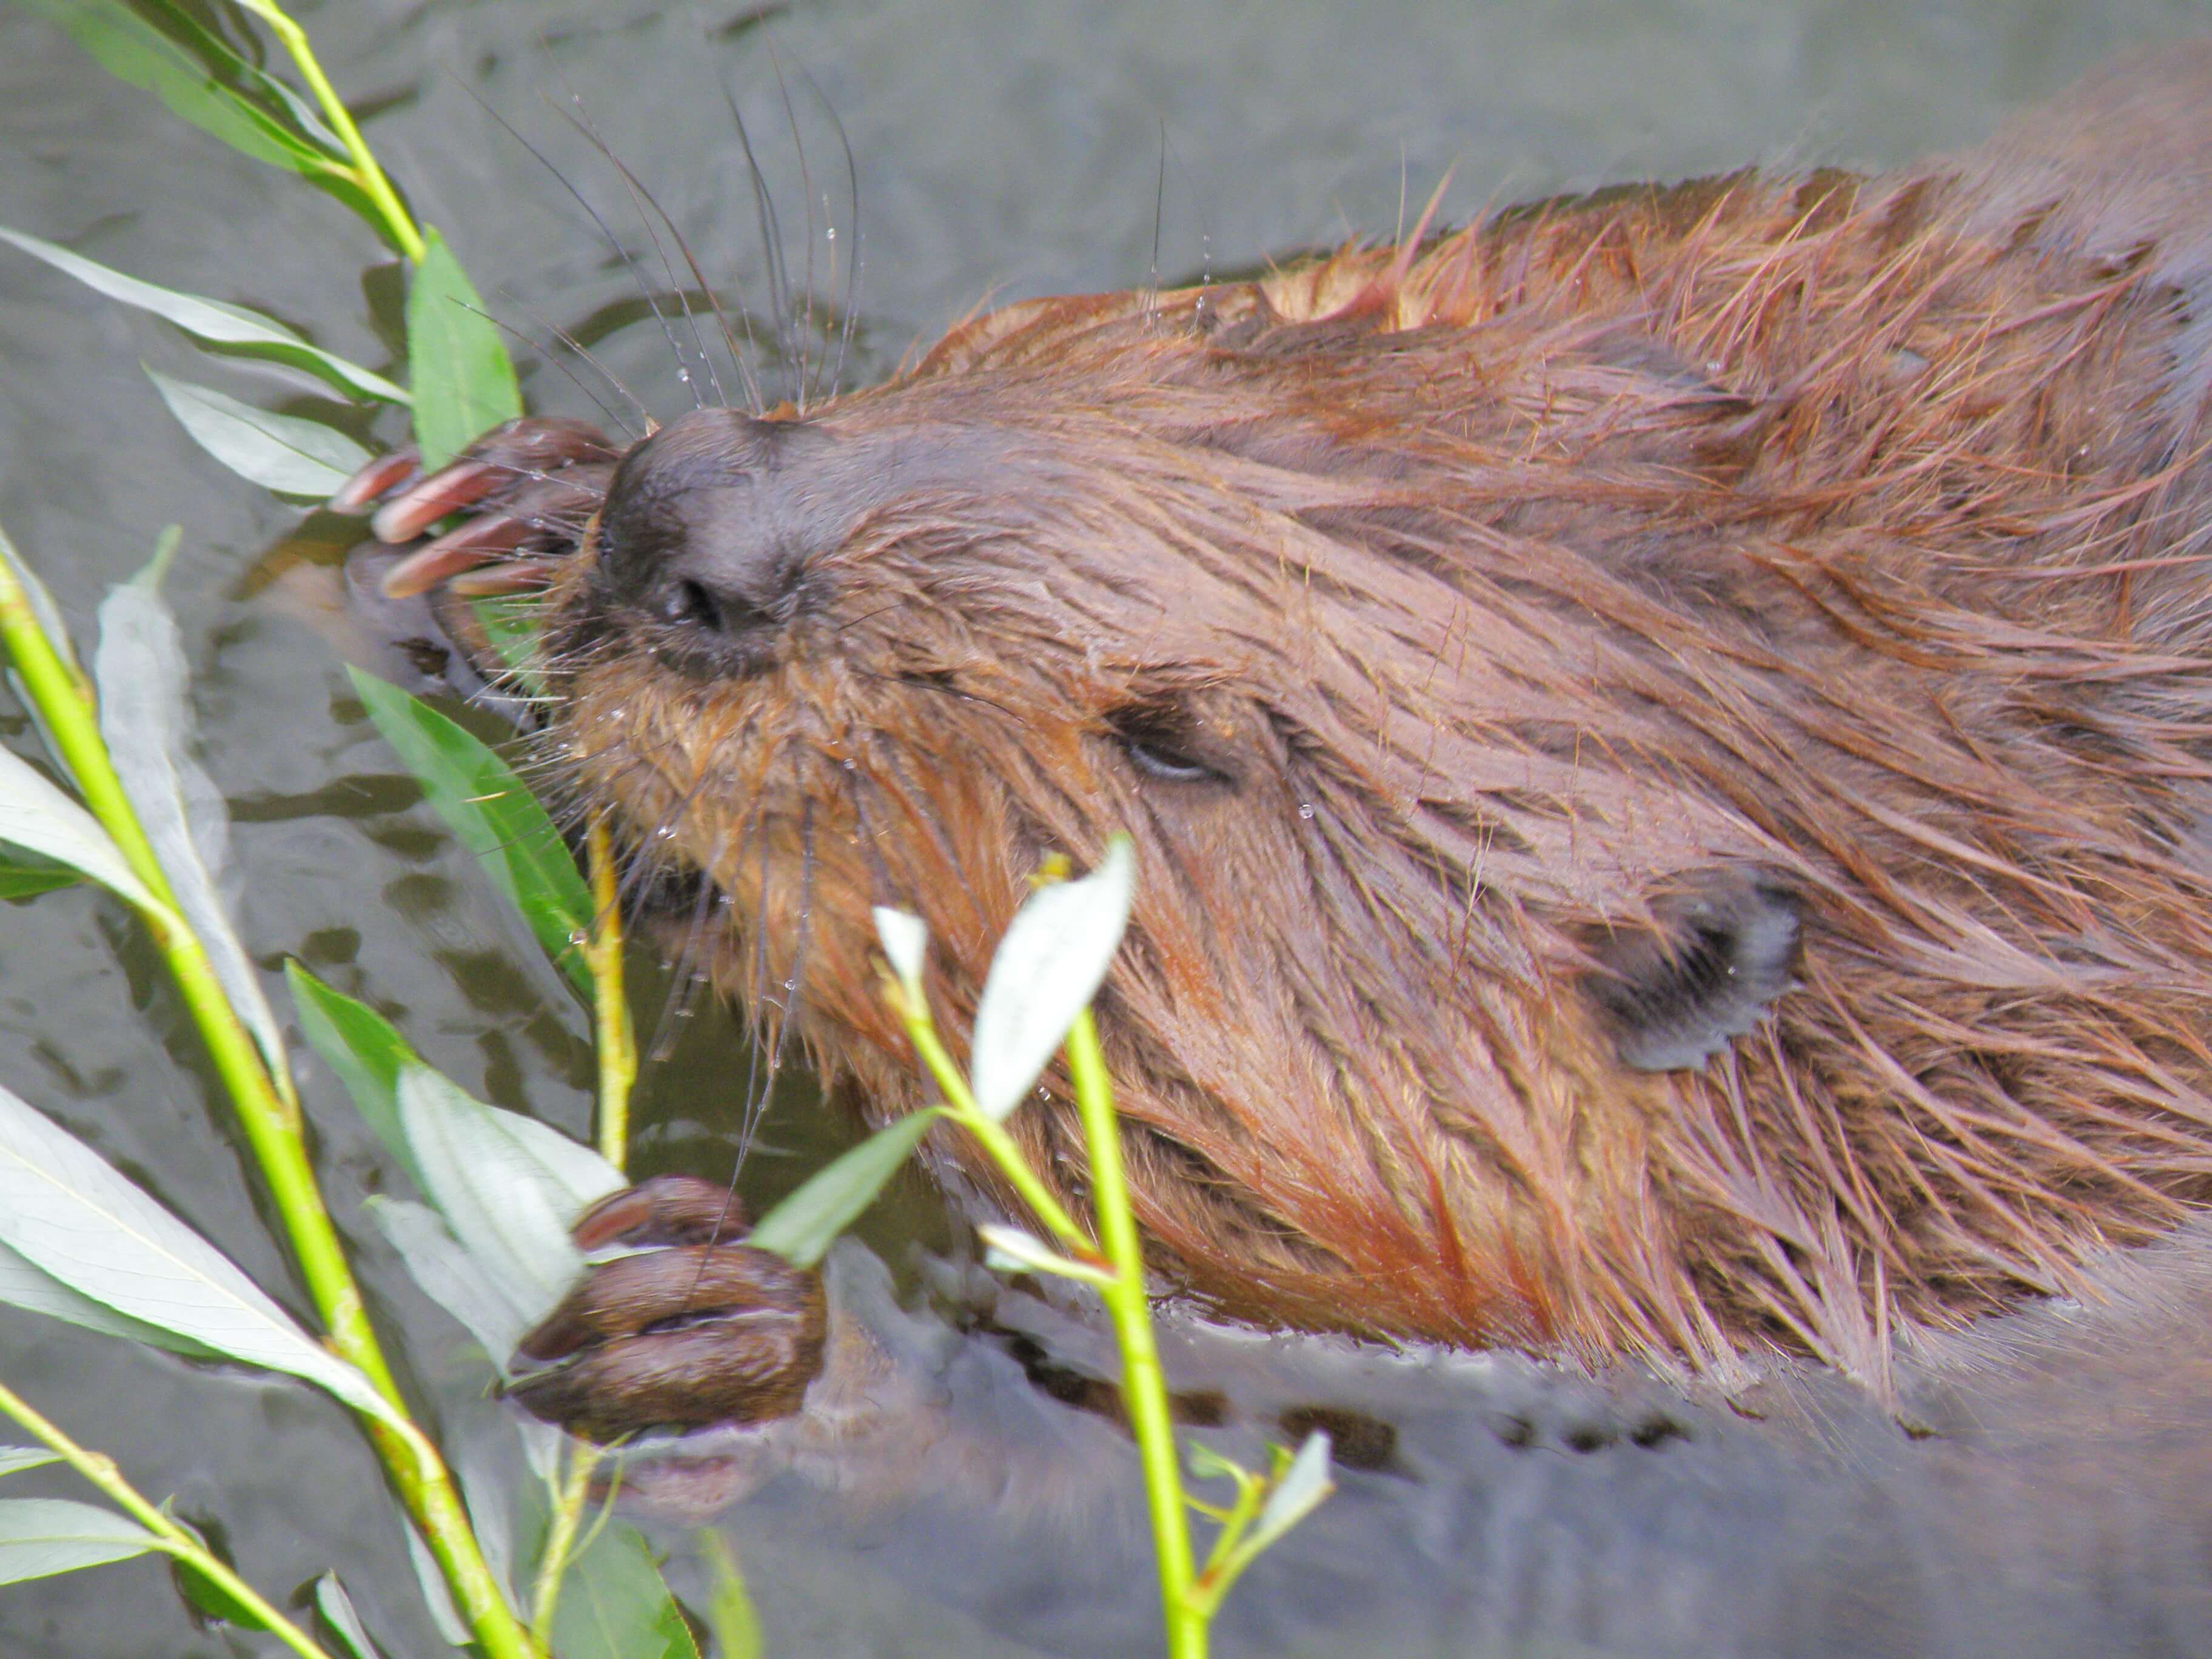 Pennsylvania trappers take more than 12,000 beavers annually, on average.